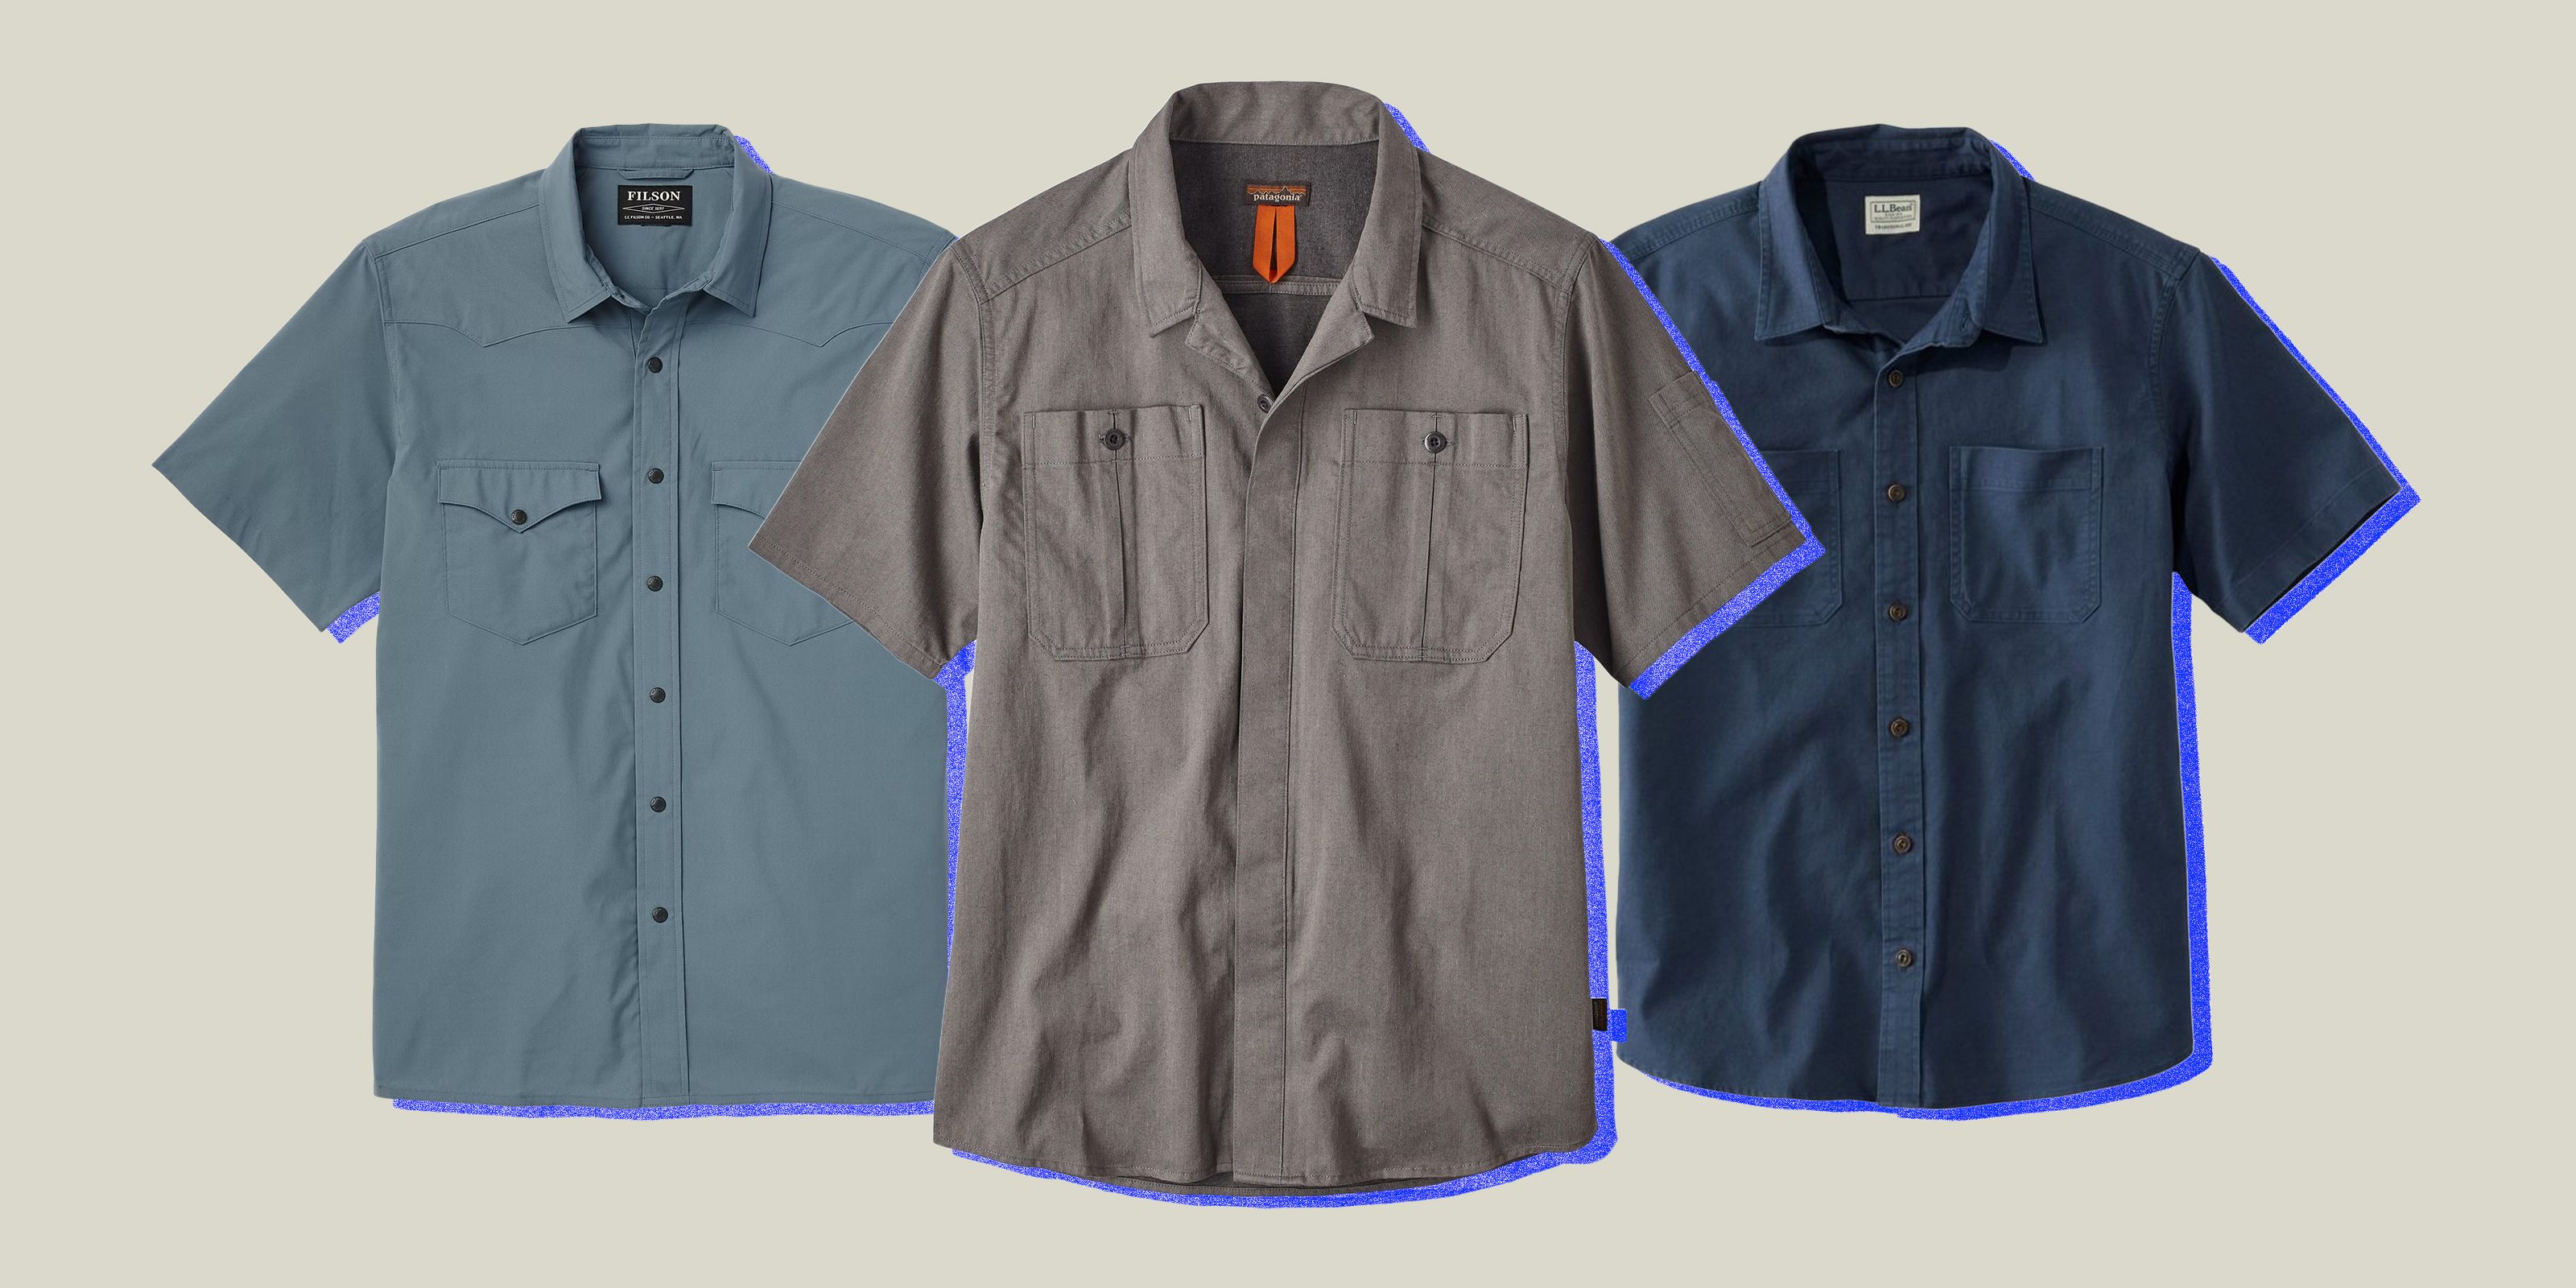 The Best Work Shirts for Men to Wear on the Job